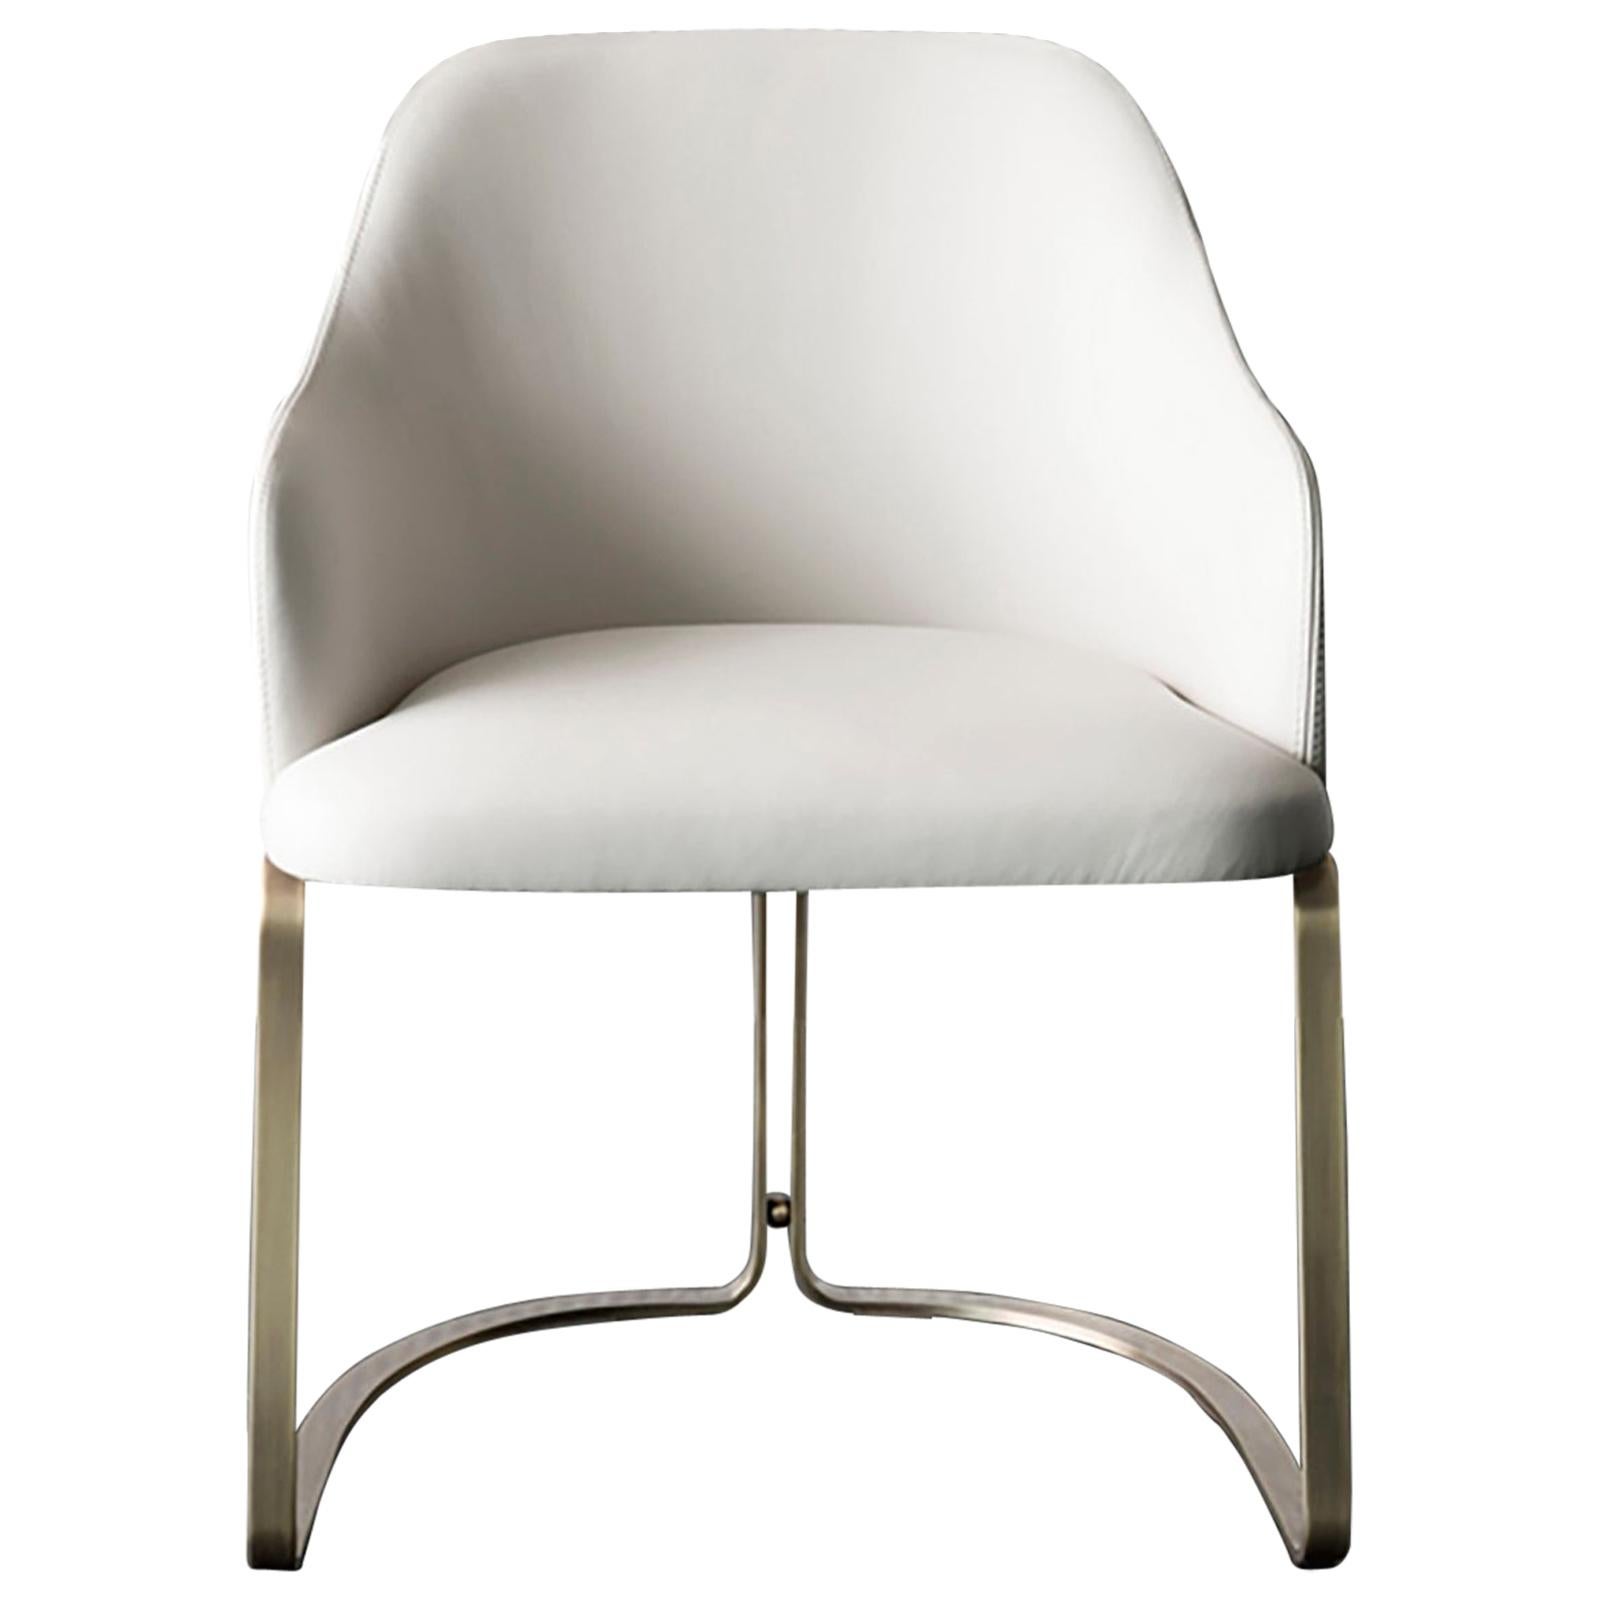 Sybil Armchair with White Leather